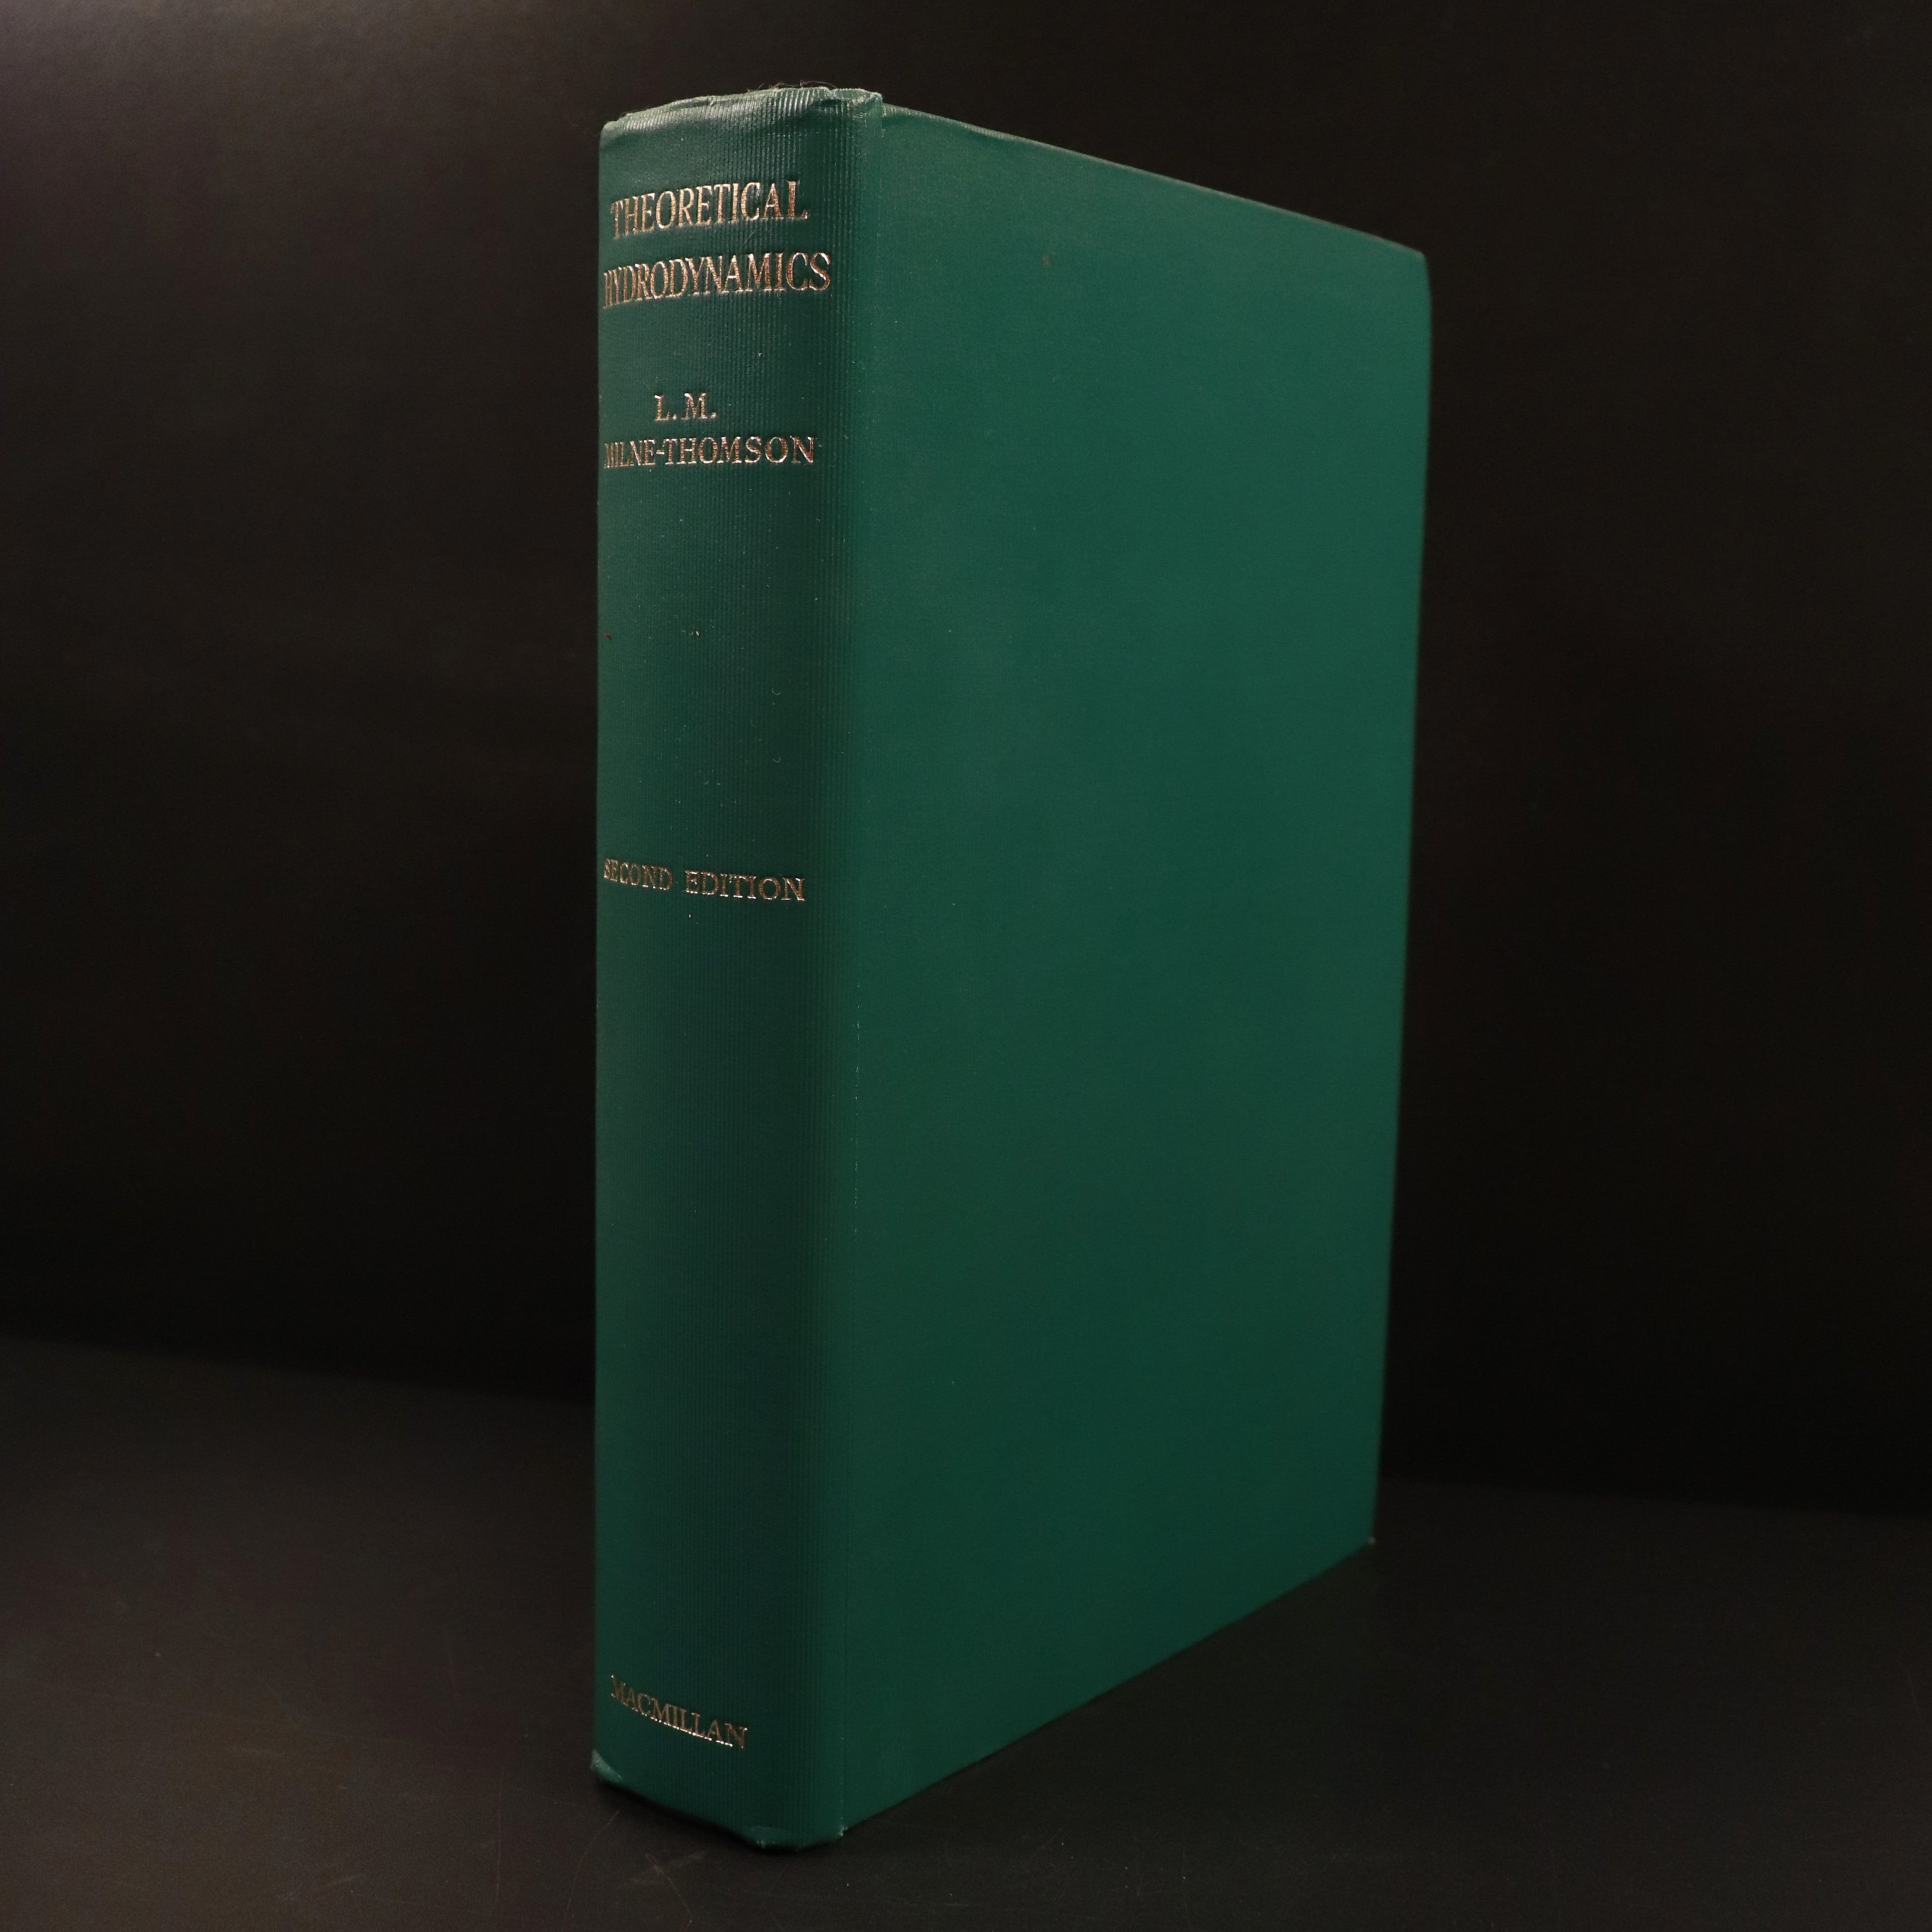 1949 Theoretical Hydrodynamics by L Milne Thomson Vintage Science Reference Book